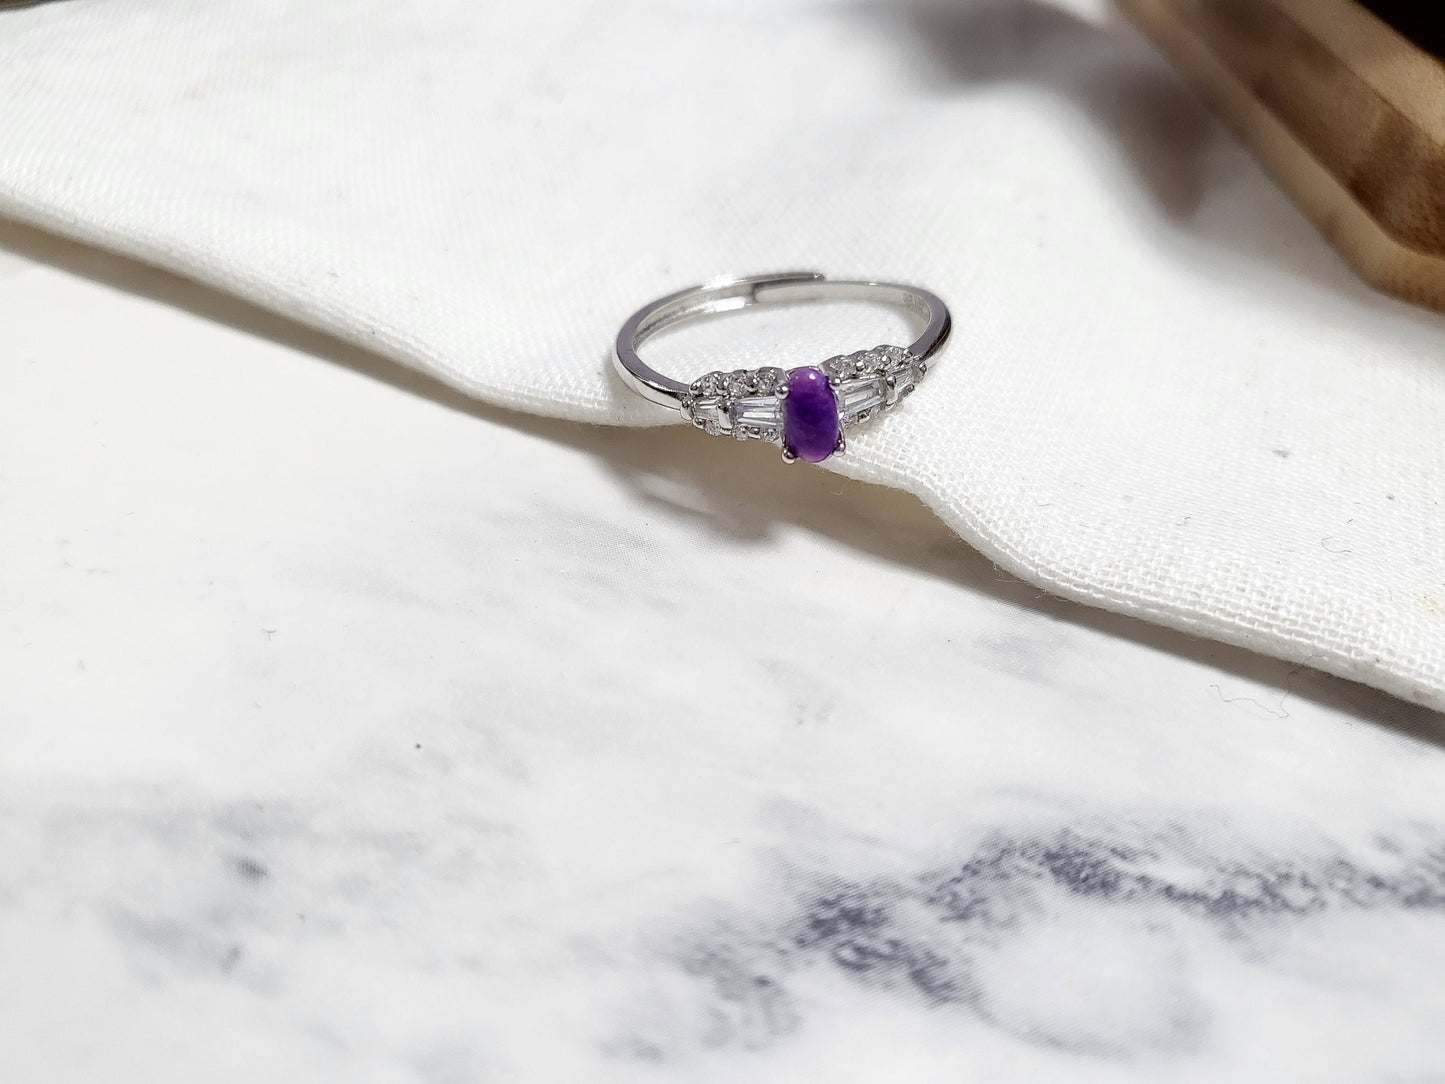 RARE Natural Sugilite Ring Raw Gel Grade Purple Gemstone Dainty Adjustable Silver Ring with Crystals